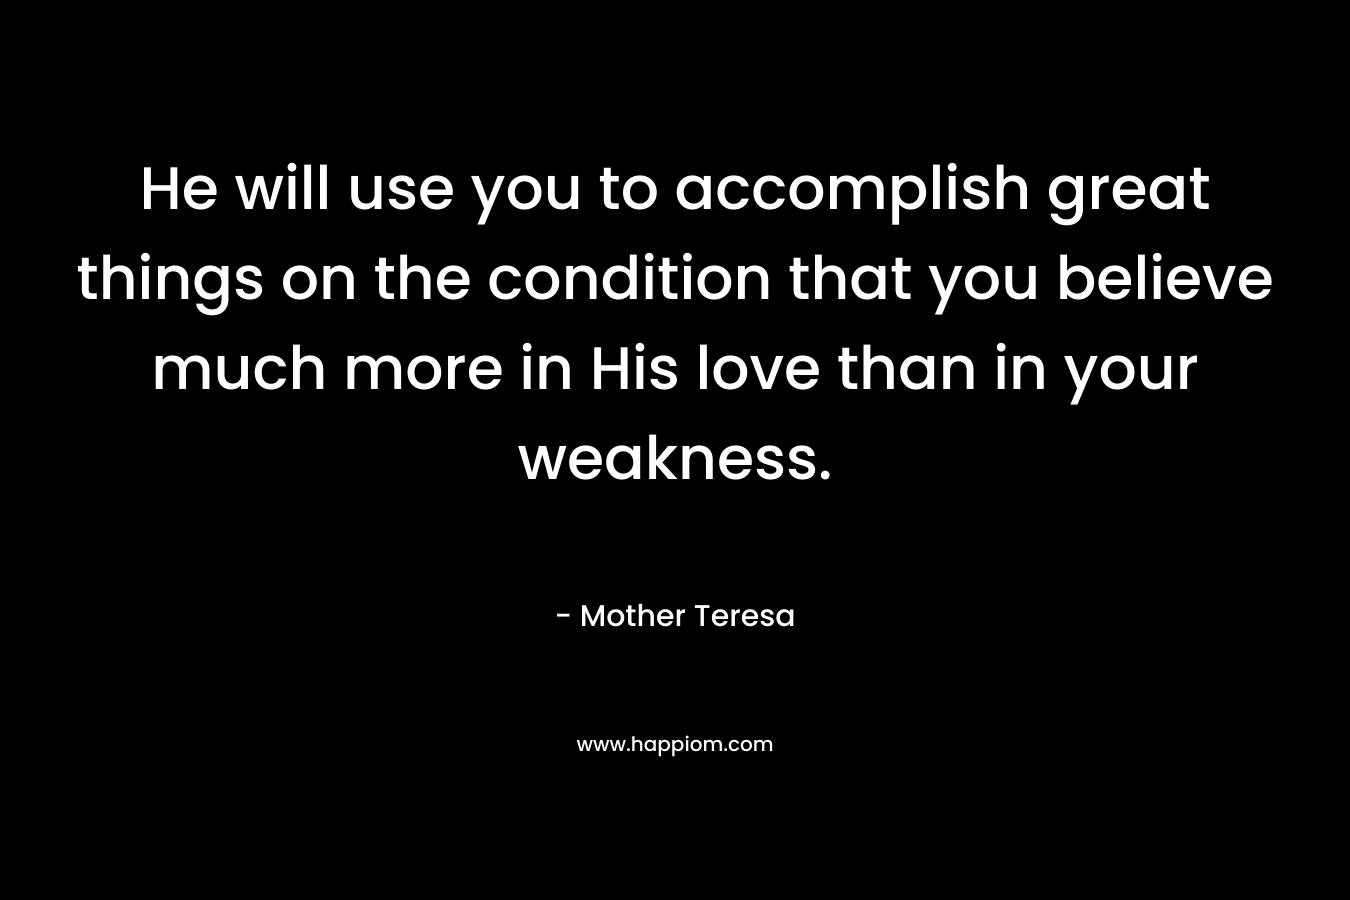 He will use you to accomplish great things on the condition that you believe much more in His love than in your weakness. – Mother Teresa